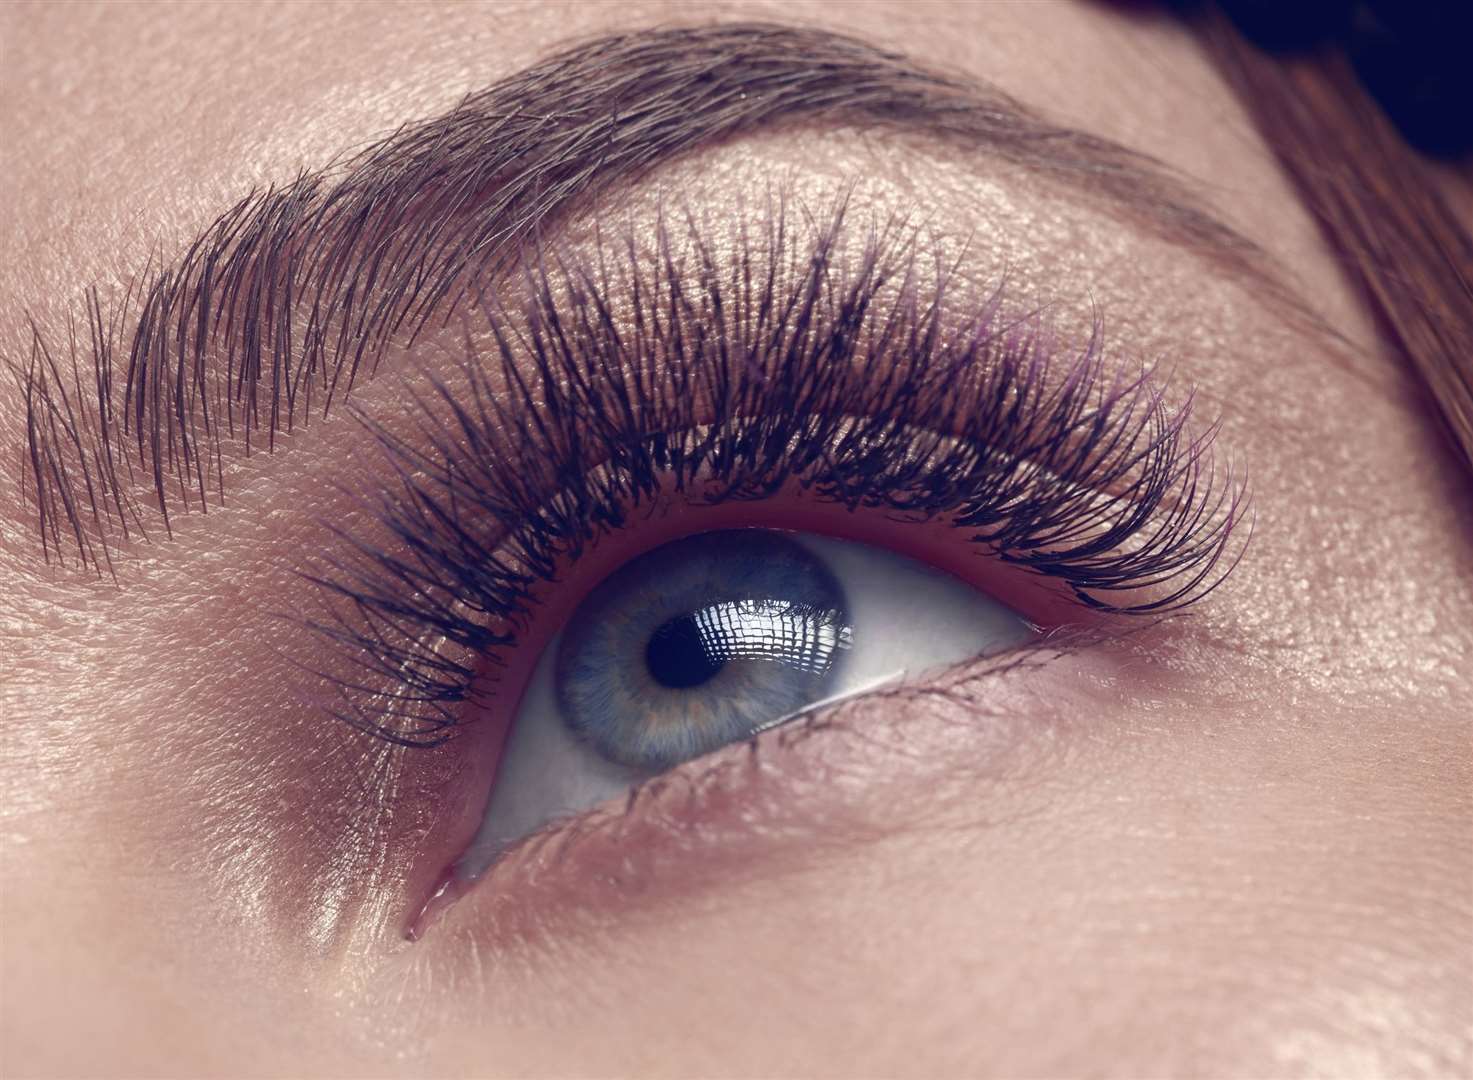 One mum fears allowing eyelashes will lead to a slippery slope of other things being accepted